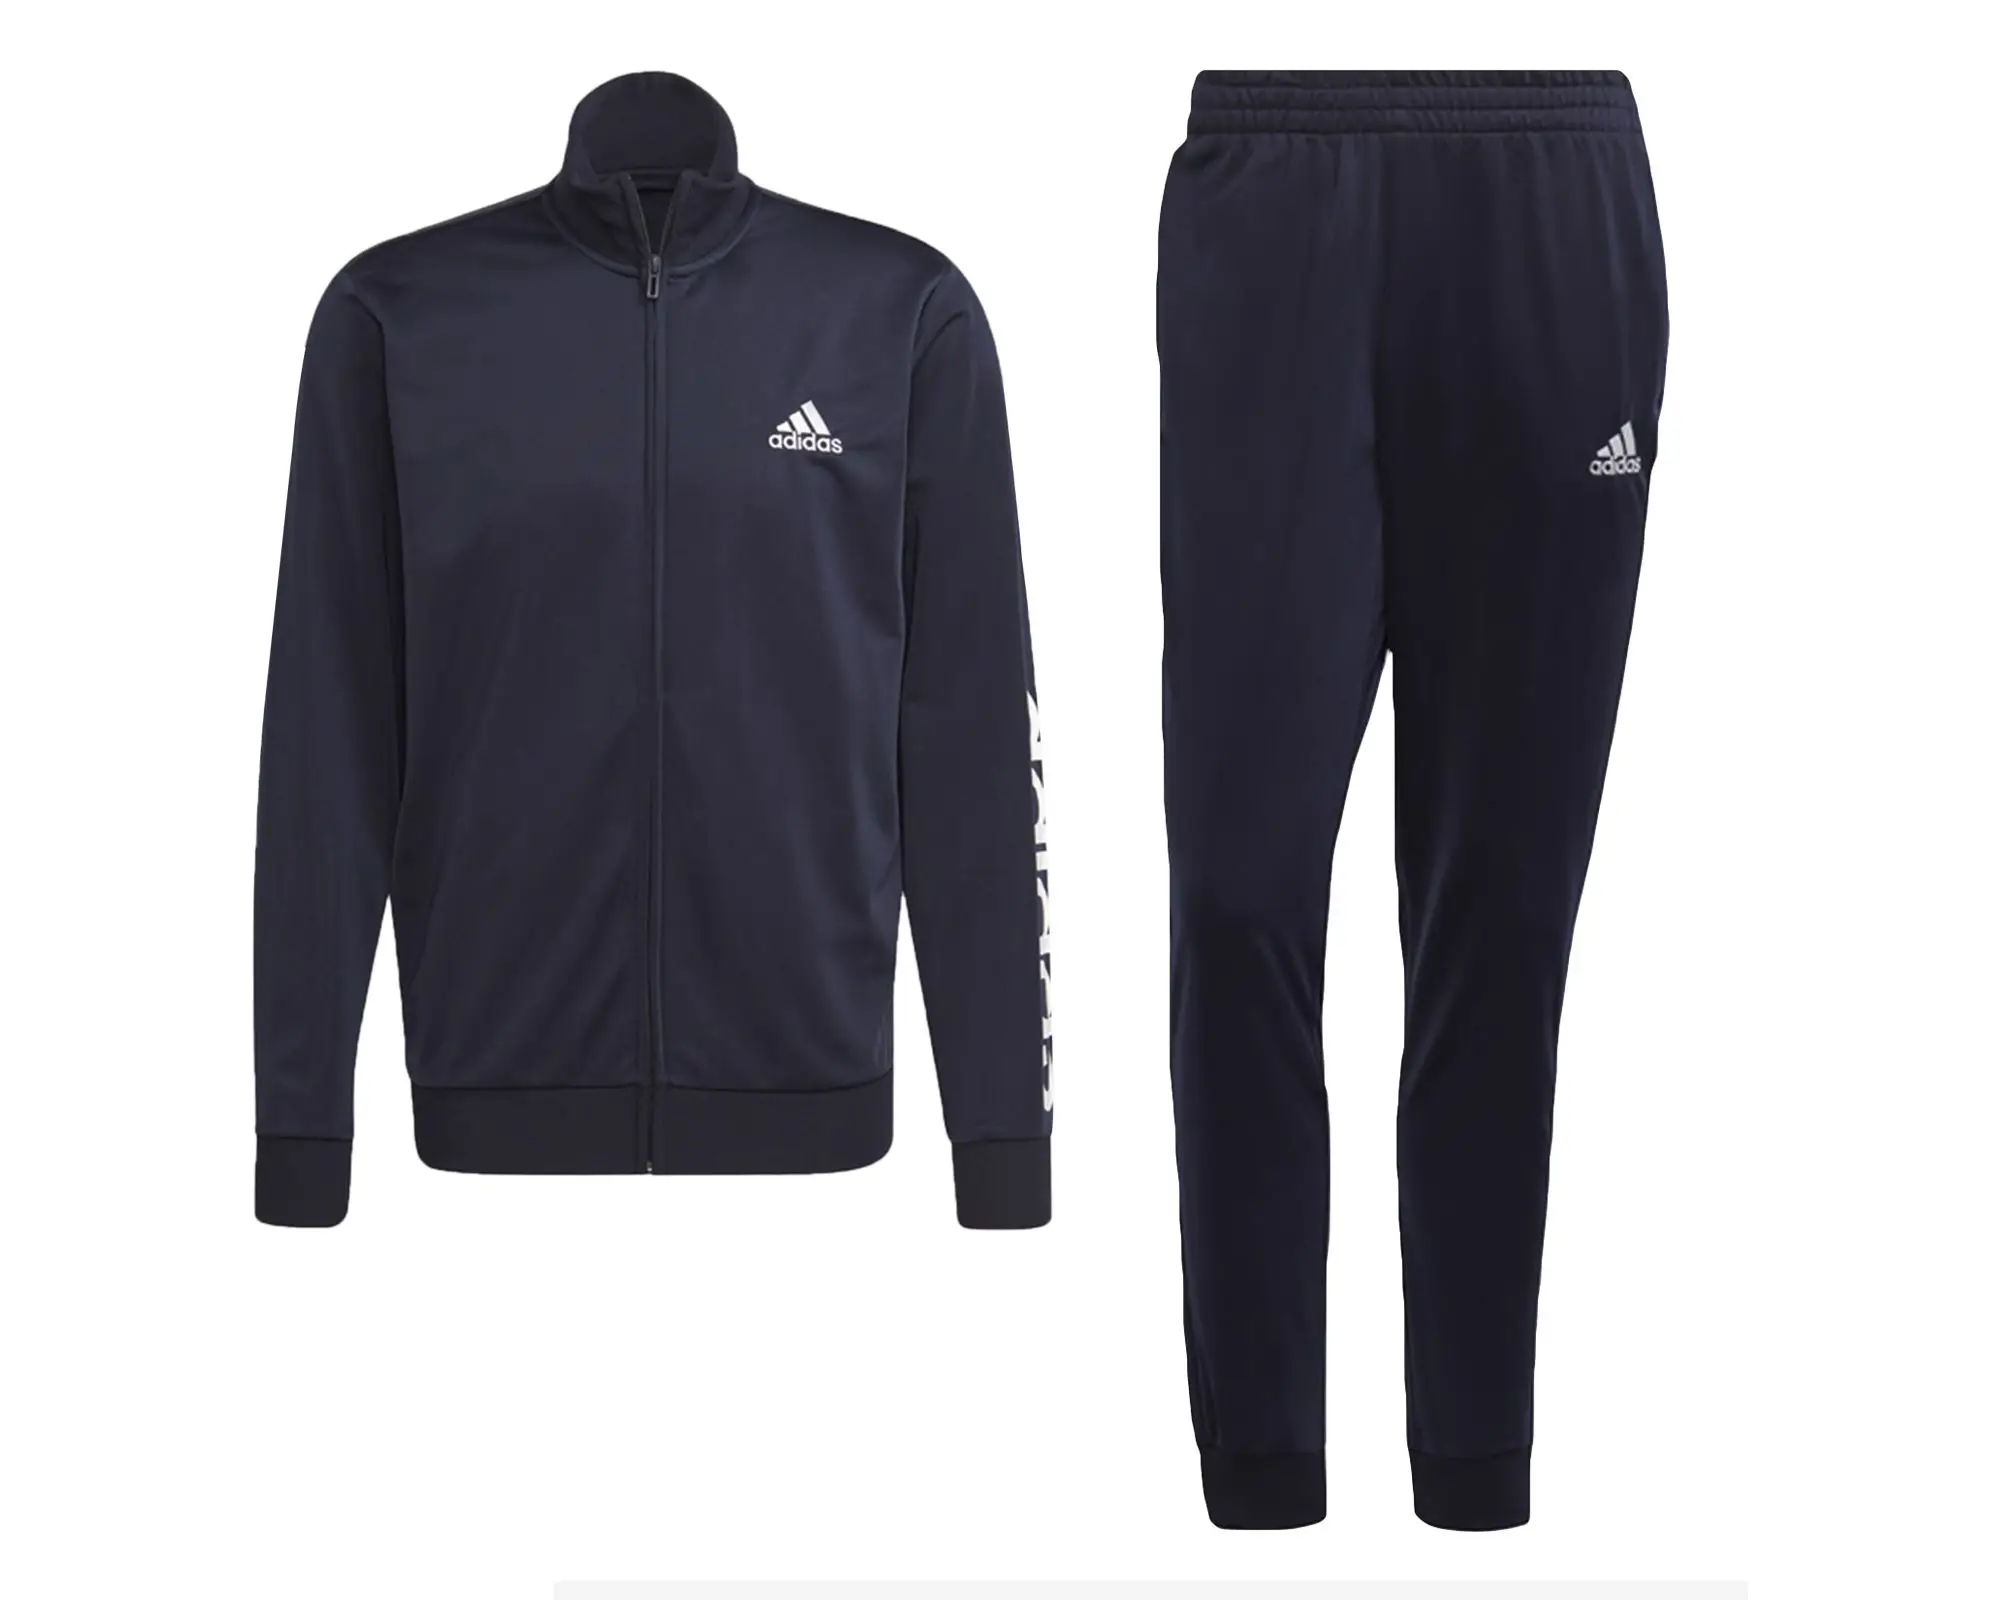 Adidas Original Navy blue Stylish Men's Casual Tracksuit Set Tops and Bottoms Casual Sports Pants and Sweats Daily Useful